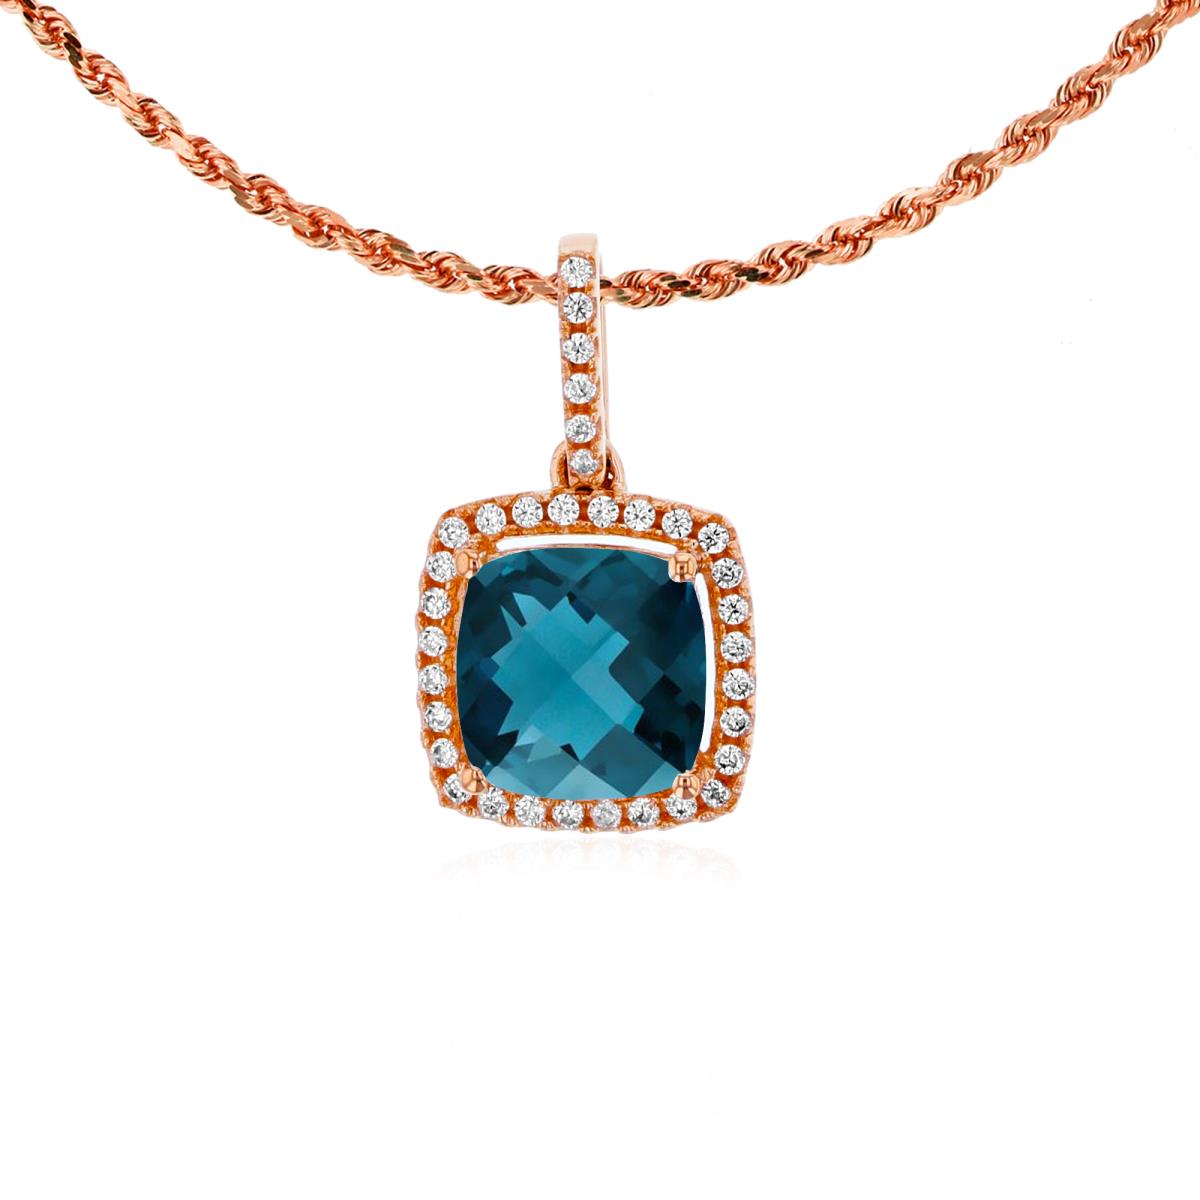 10K Rose Gold 7mm Cushion London Blue Topaz & 0.14 CTTW Rnd Diamond Halo 18" Rope Chain Necklace